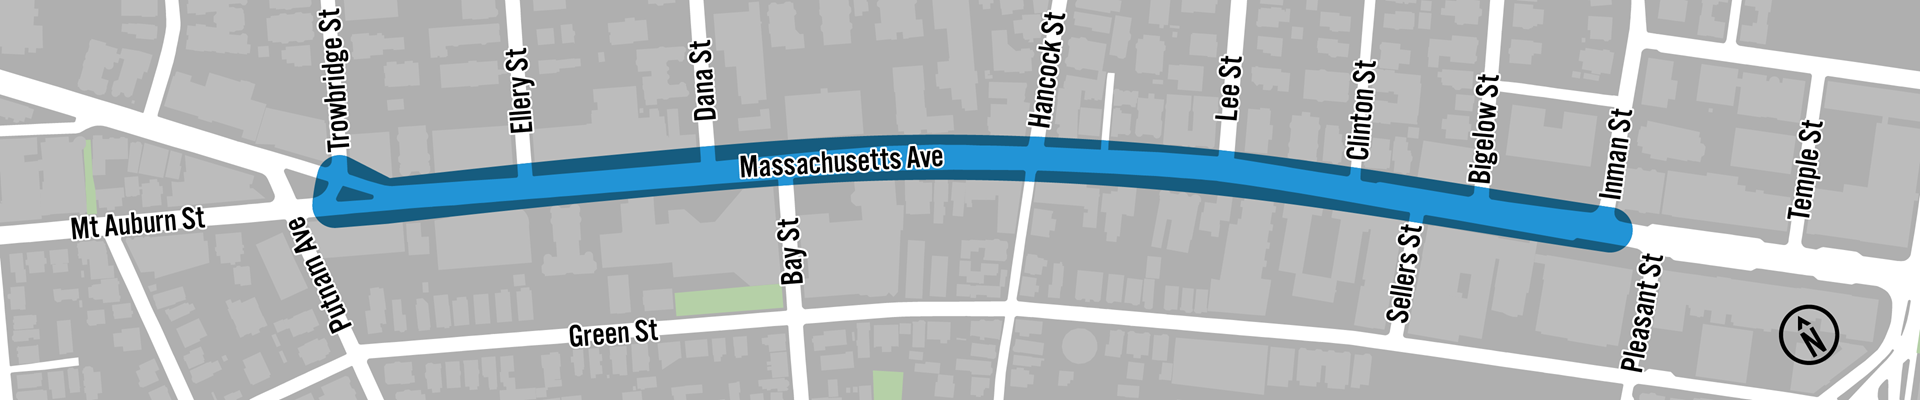 A map showing the streets around the project area. The Project Area, Mass Ave between Trowbridge St and Inman St is highlighted.